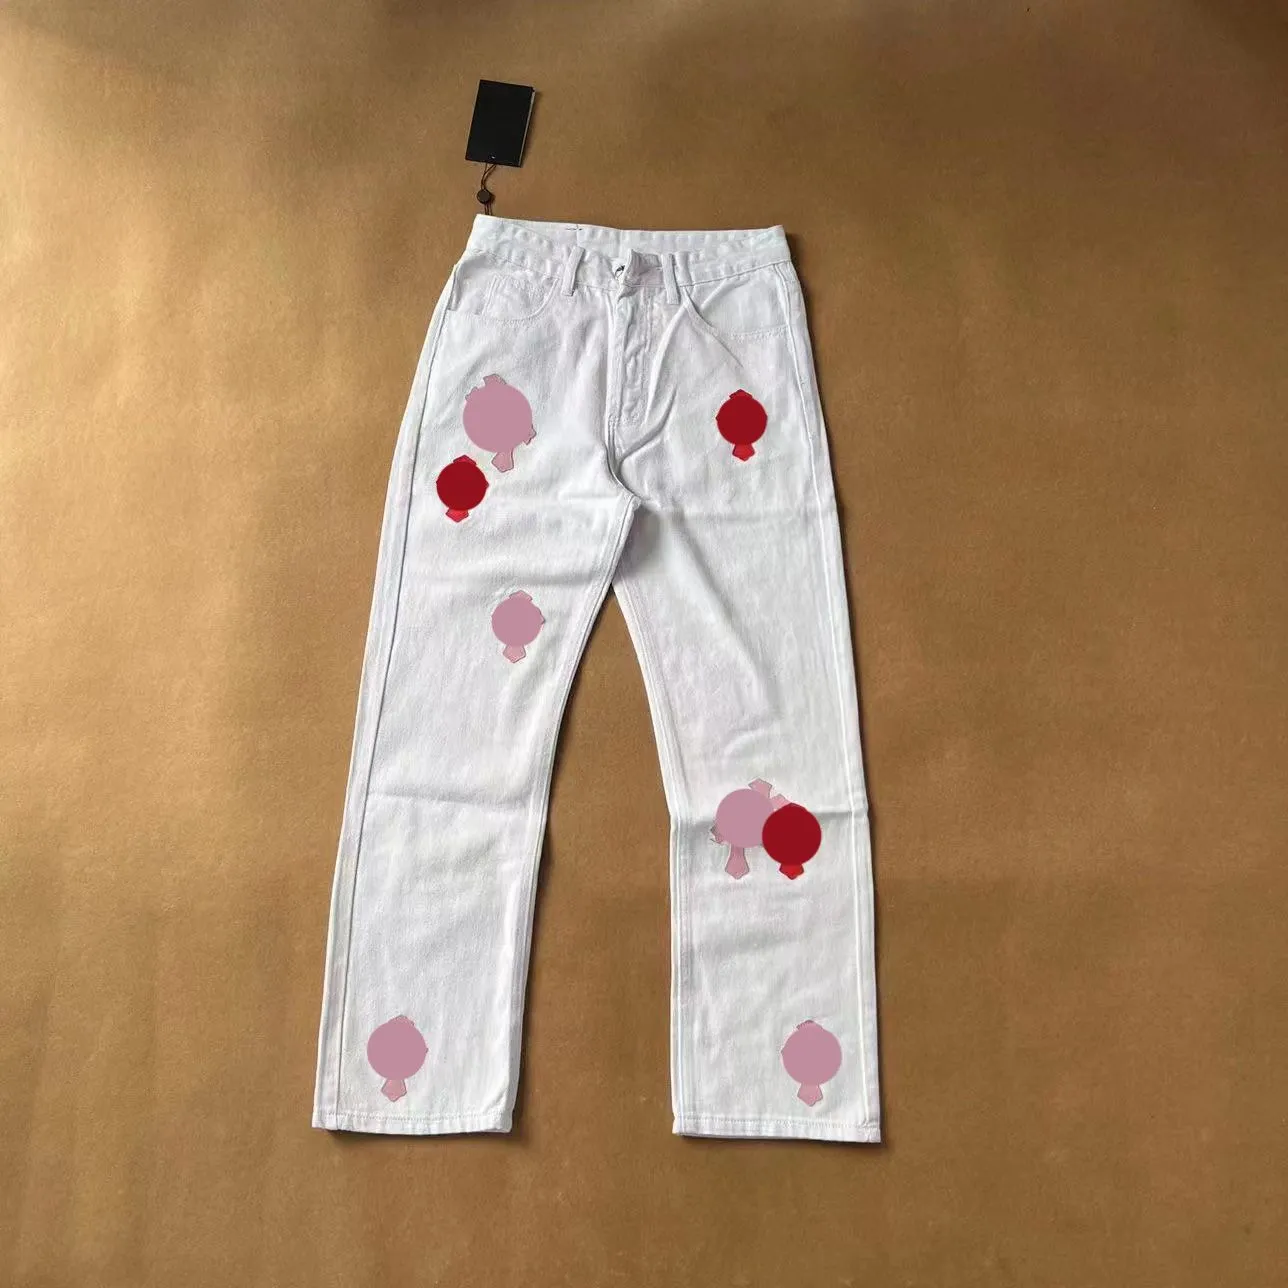 2023 New Mens Designer Make Old Washed Jeans Chrome Straight Trousers Heart Letter Prints for Women Men Casual Long Style